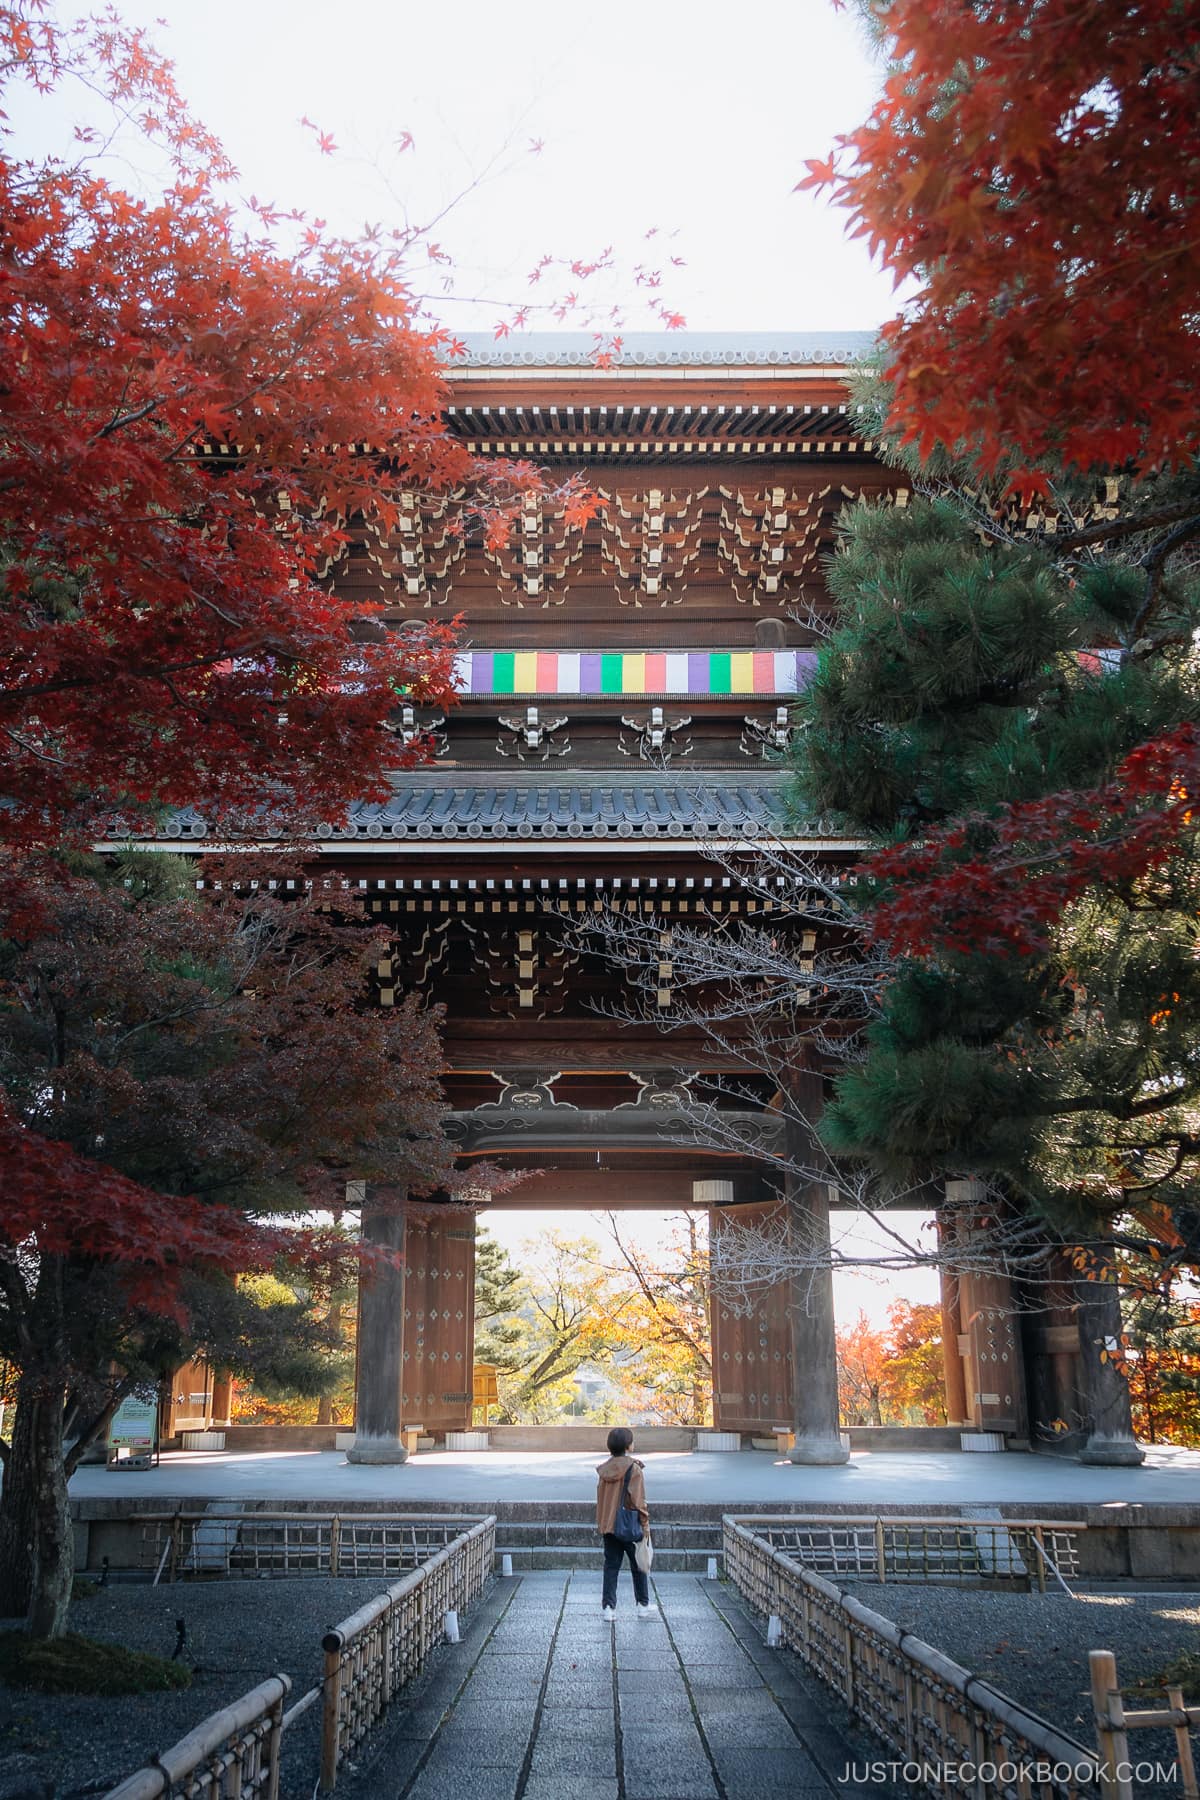 Person standing in front of a temple entrance gate lined with red autumn leaves